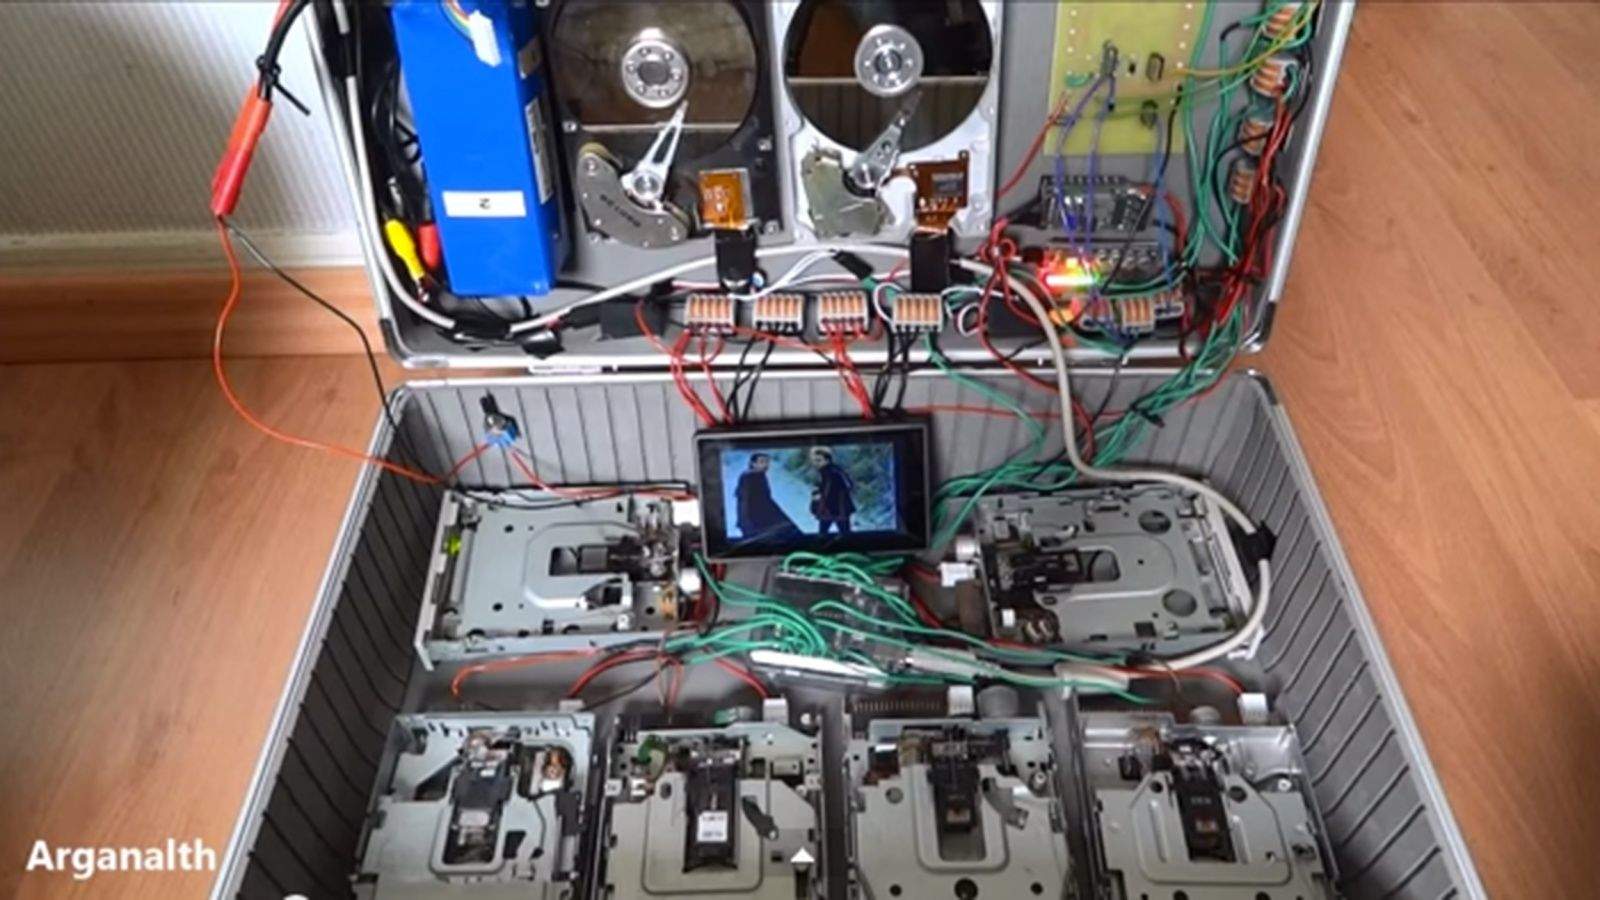 Arganalth makes music with hold floppy and hard drives. Photo: Arganalth/YouTube